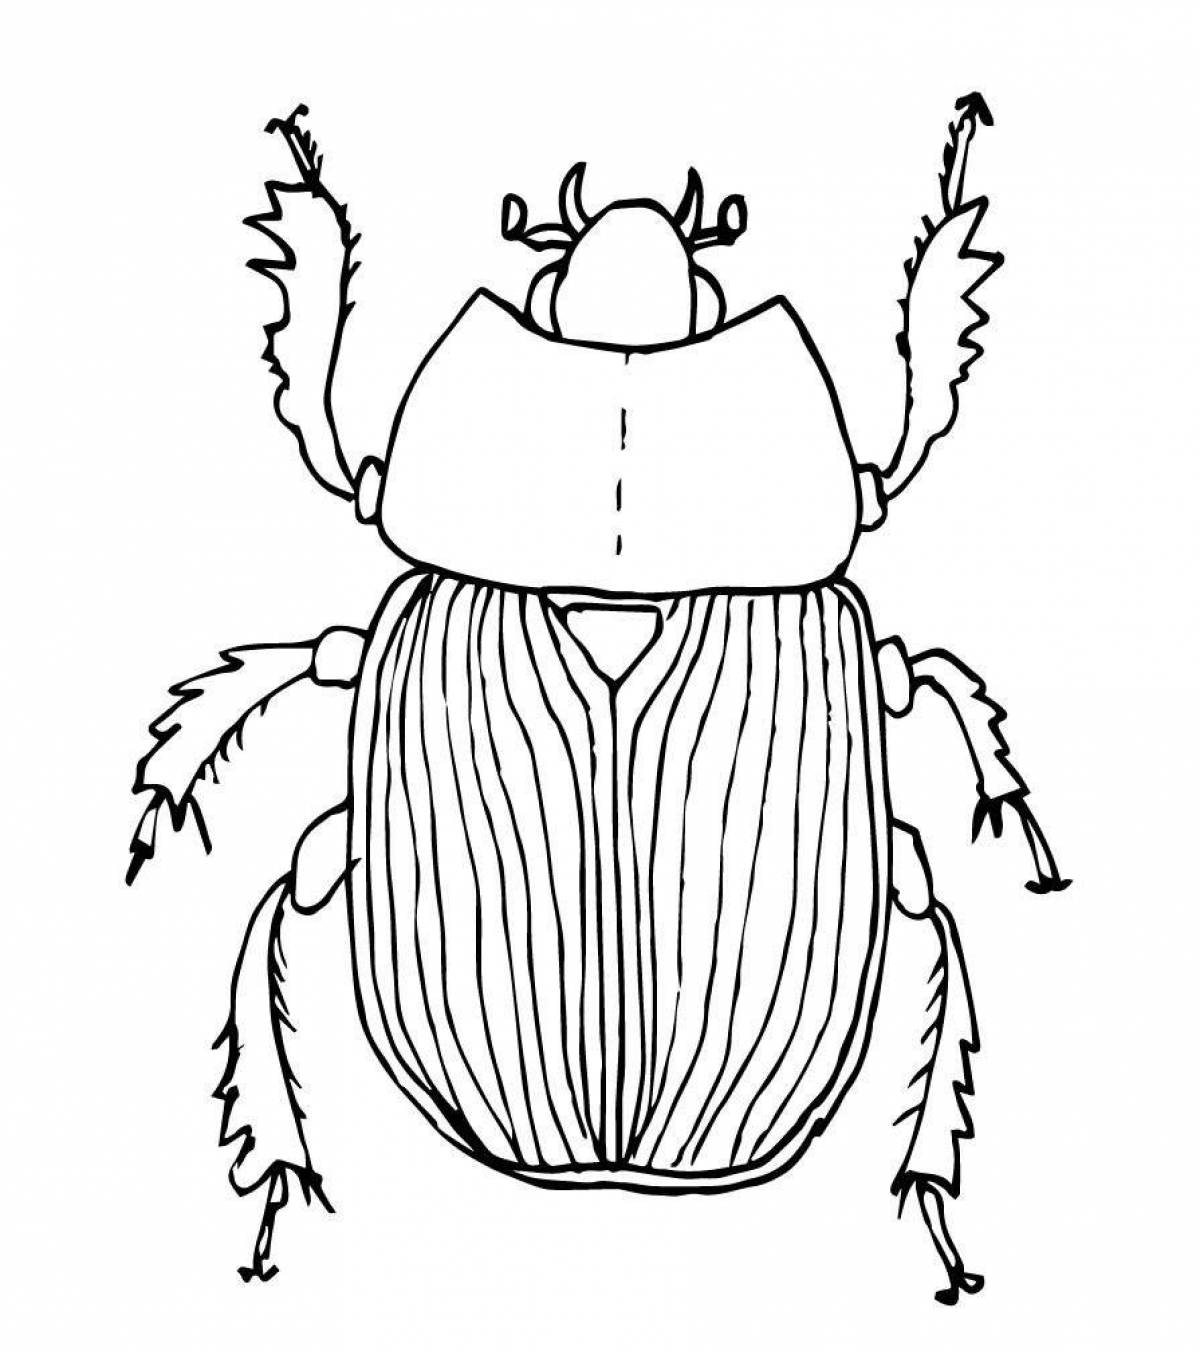 Adorable beetle coloring book for kids